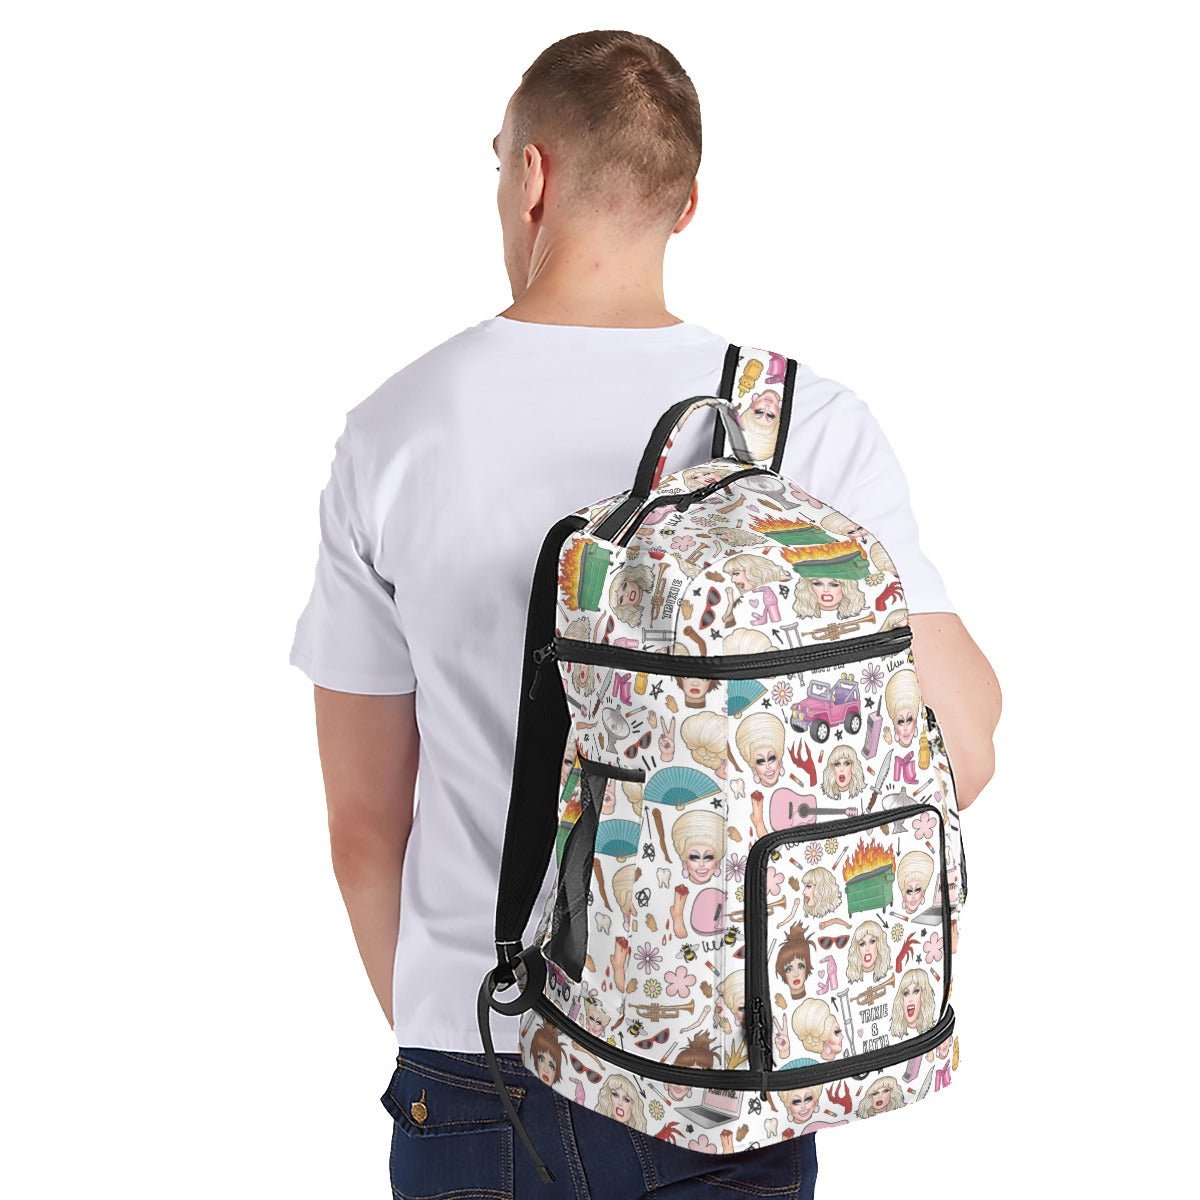 Trixie Katya - Faces Large Backpack - dragqueenmerch